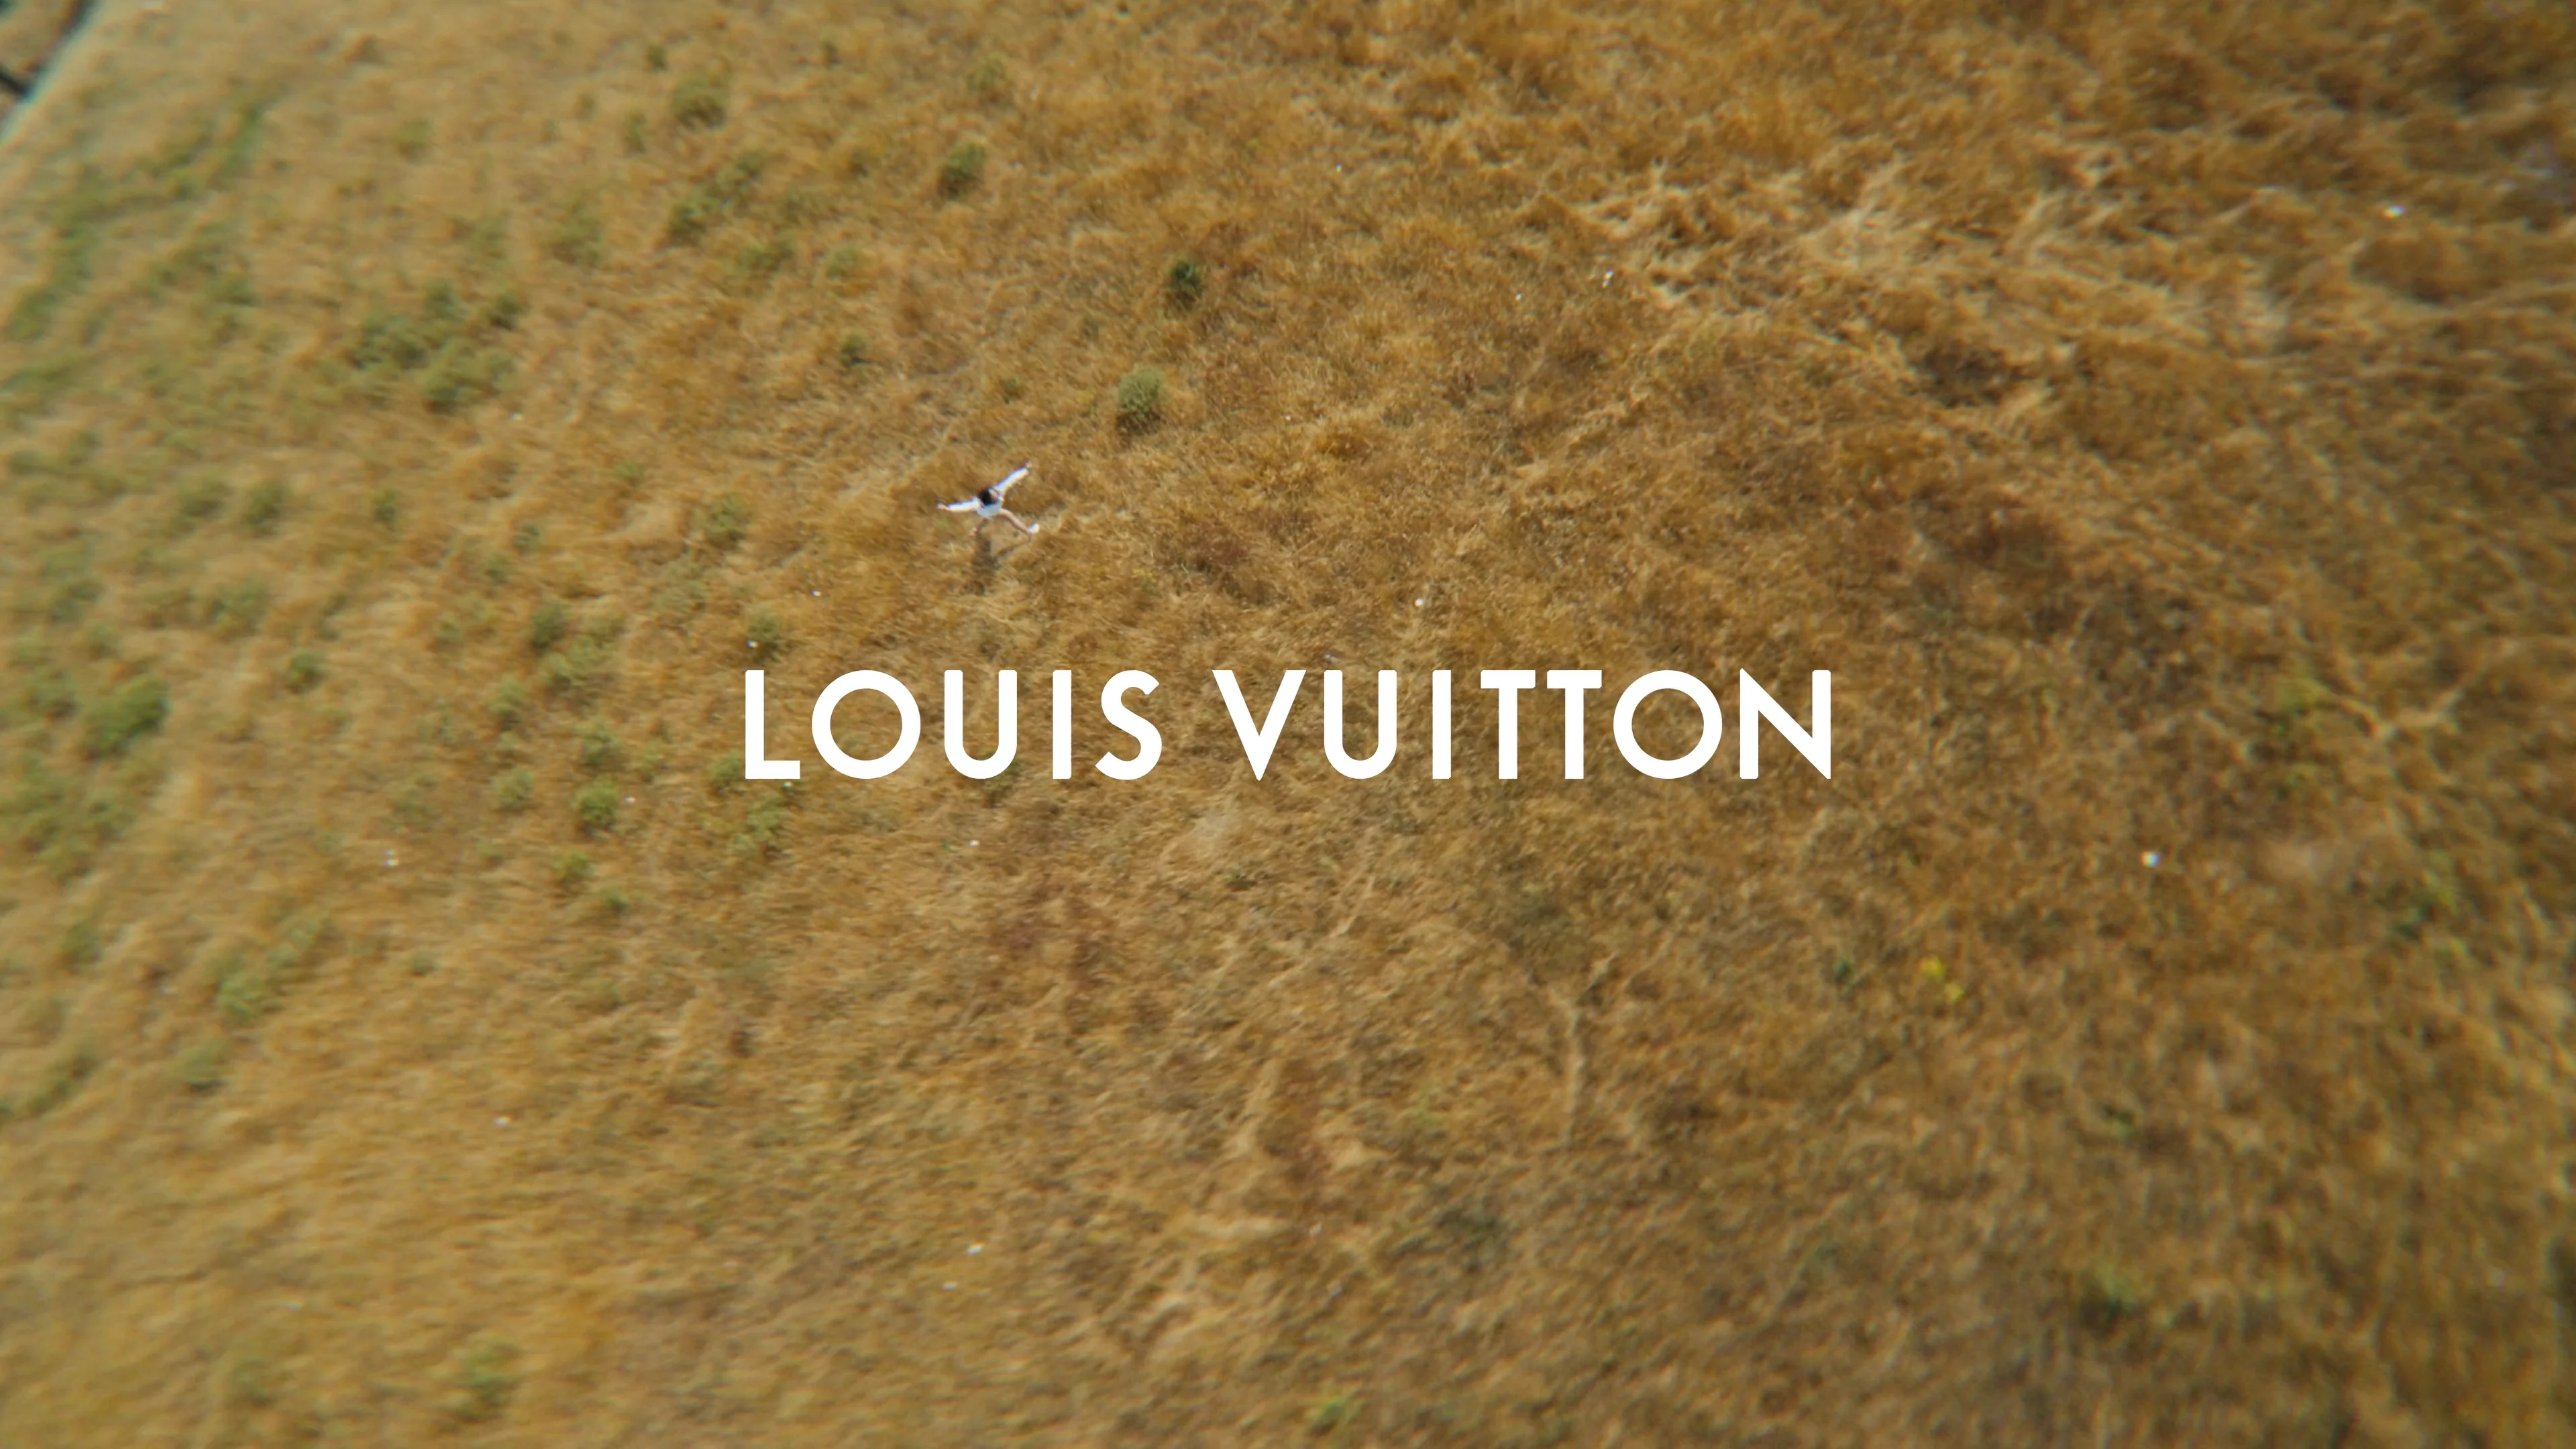 Louis Vuitton's Summer Collection, Video published by Igreatstore